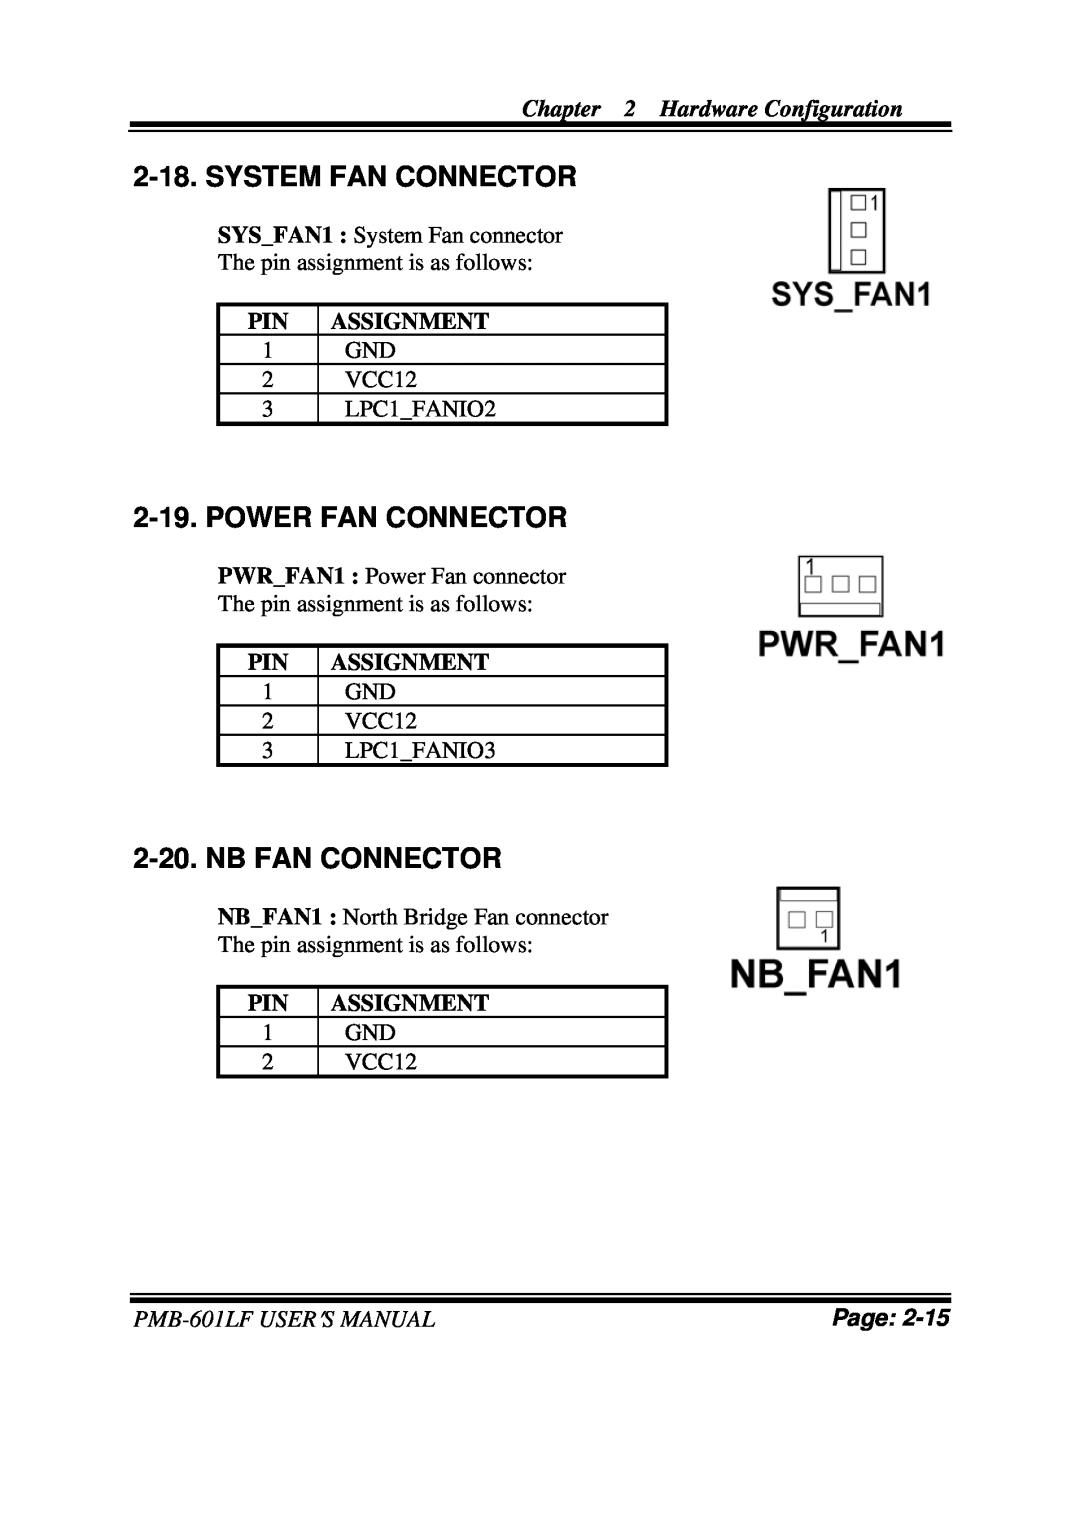 Intel PMB-601LF System Fan Connector, Power Fan Connector, Nb Fan Connector, Hardware Configuration, Pin Assignment, Page 